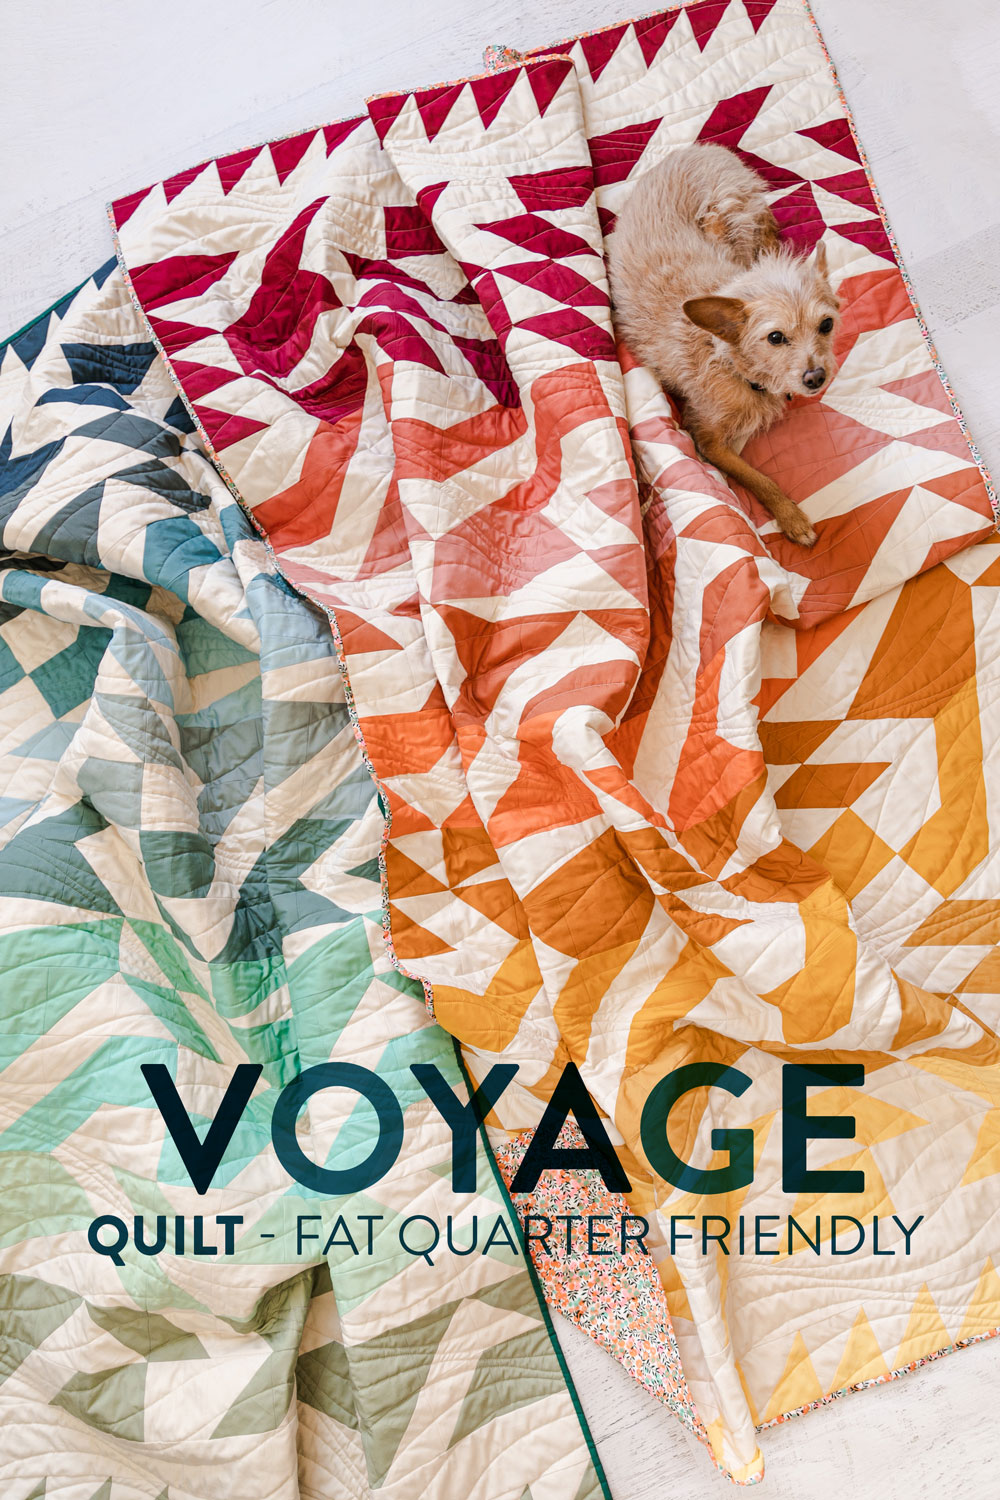 The Voyage quilt pattern is fat quarter friendly and a great quilt pattern for beginners – includes lots of extra video tutorials. suzyquilts.com #ombrequilt #quiltpattern